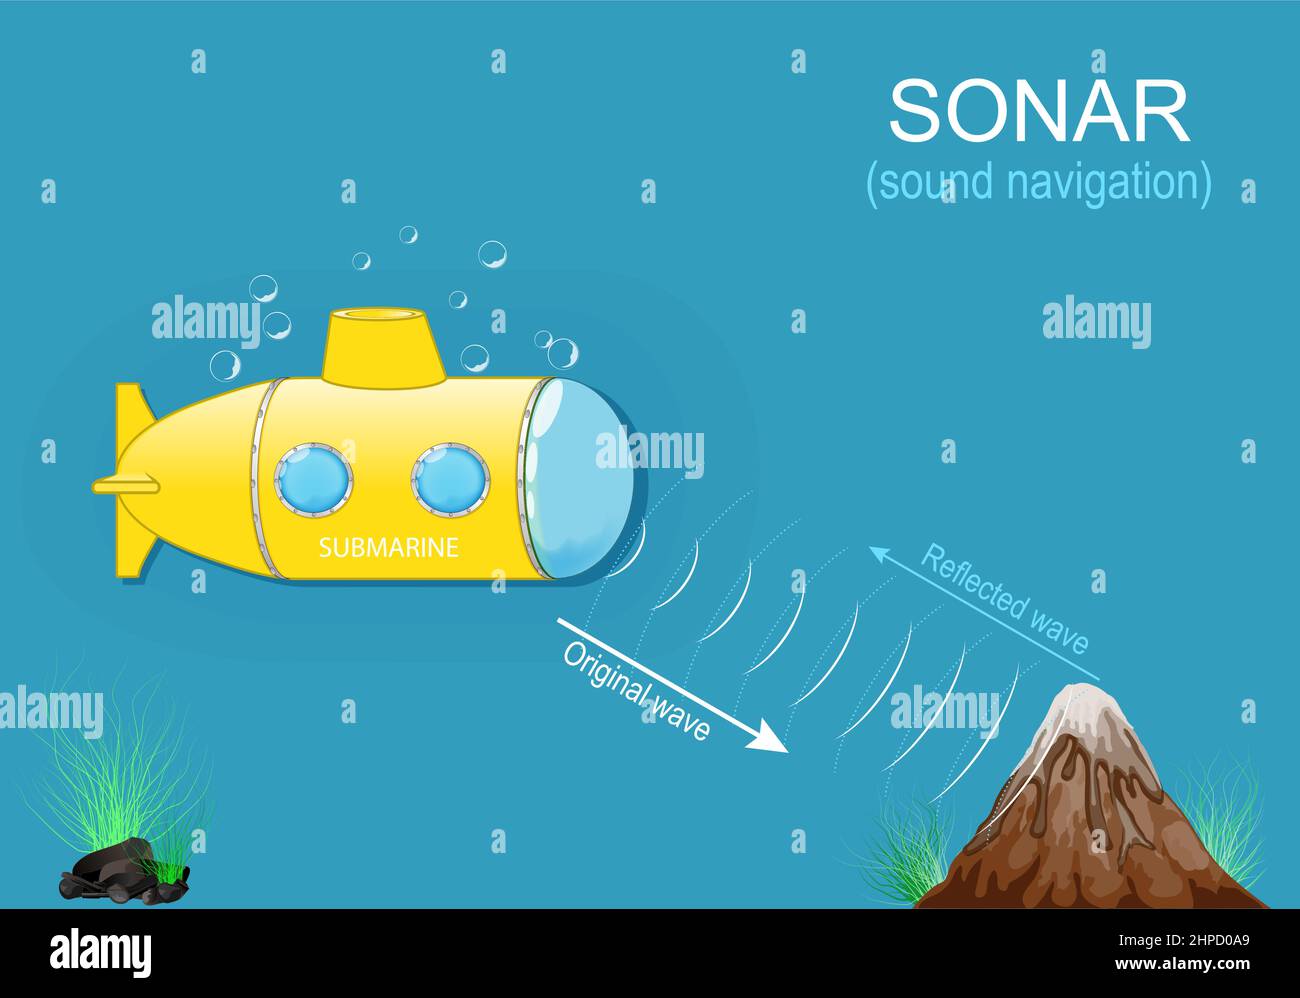 Sonar and Submarine navigation. sound navigation. sound waves for detect objects under the surface of the water. infographic. vector poster Stock Vector